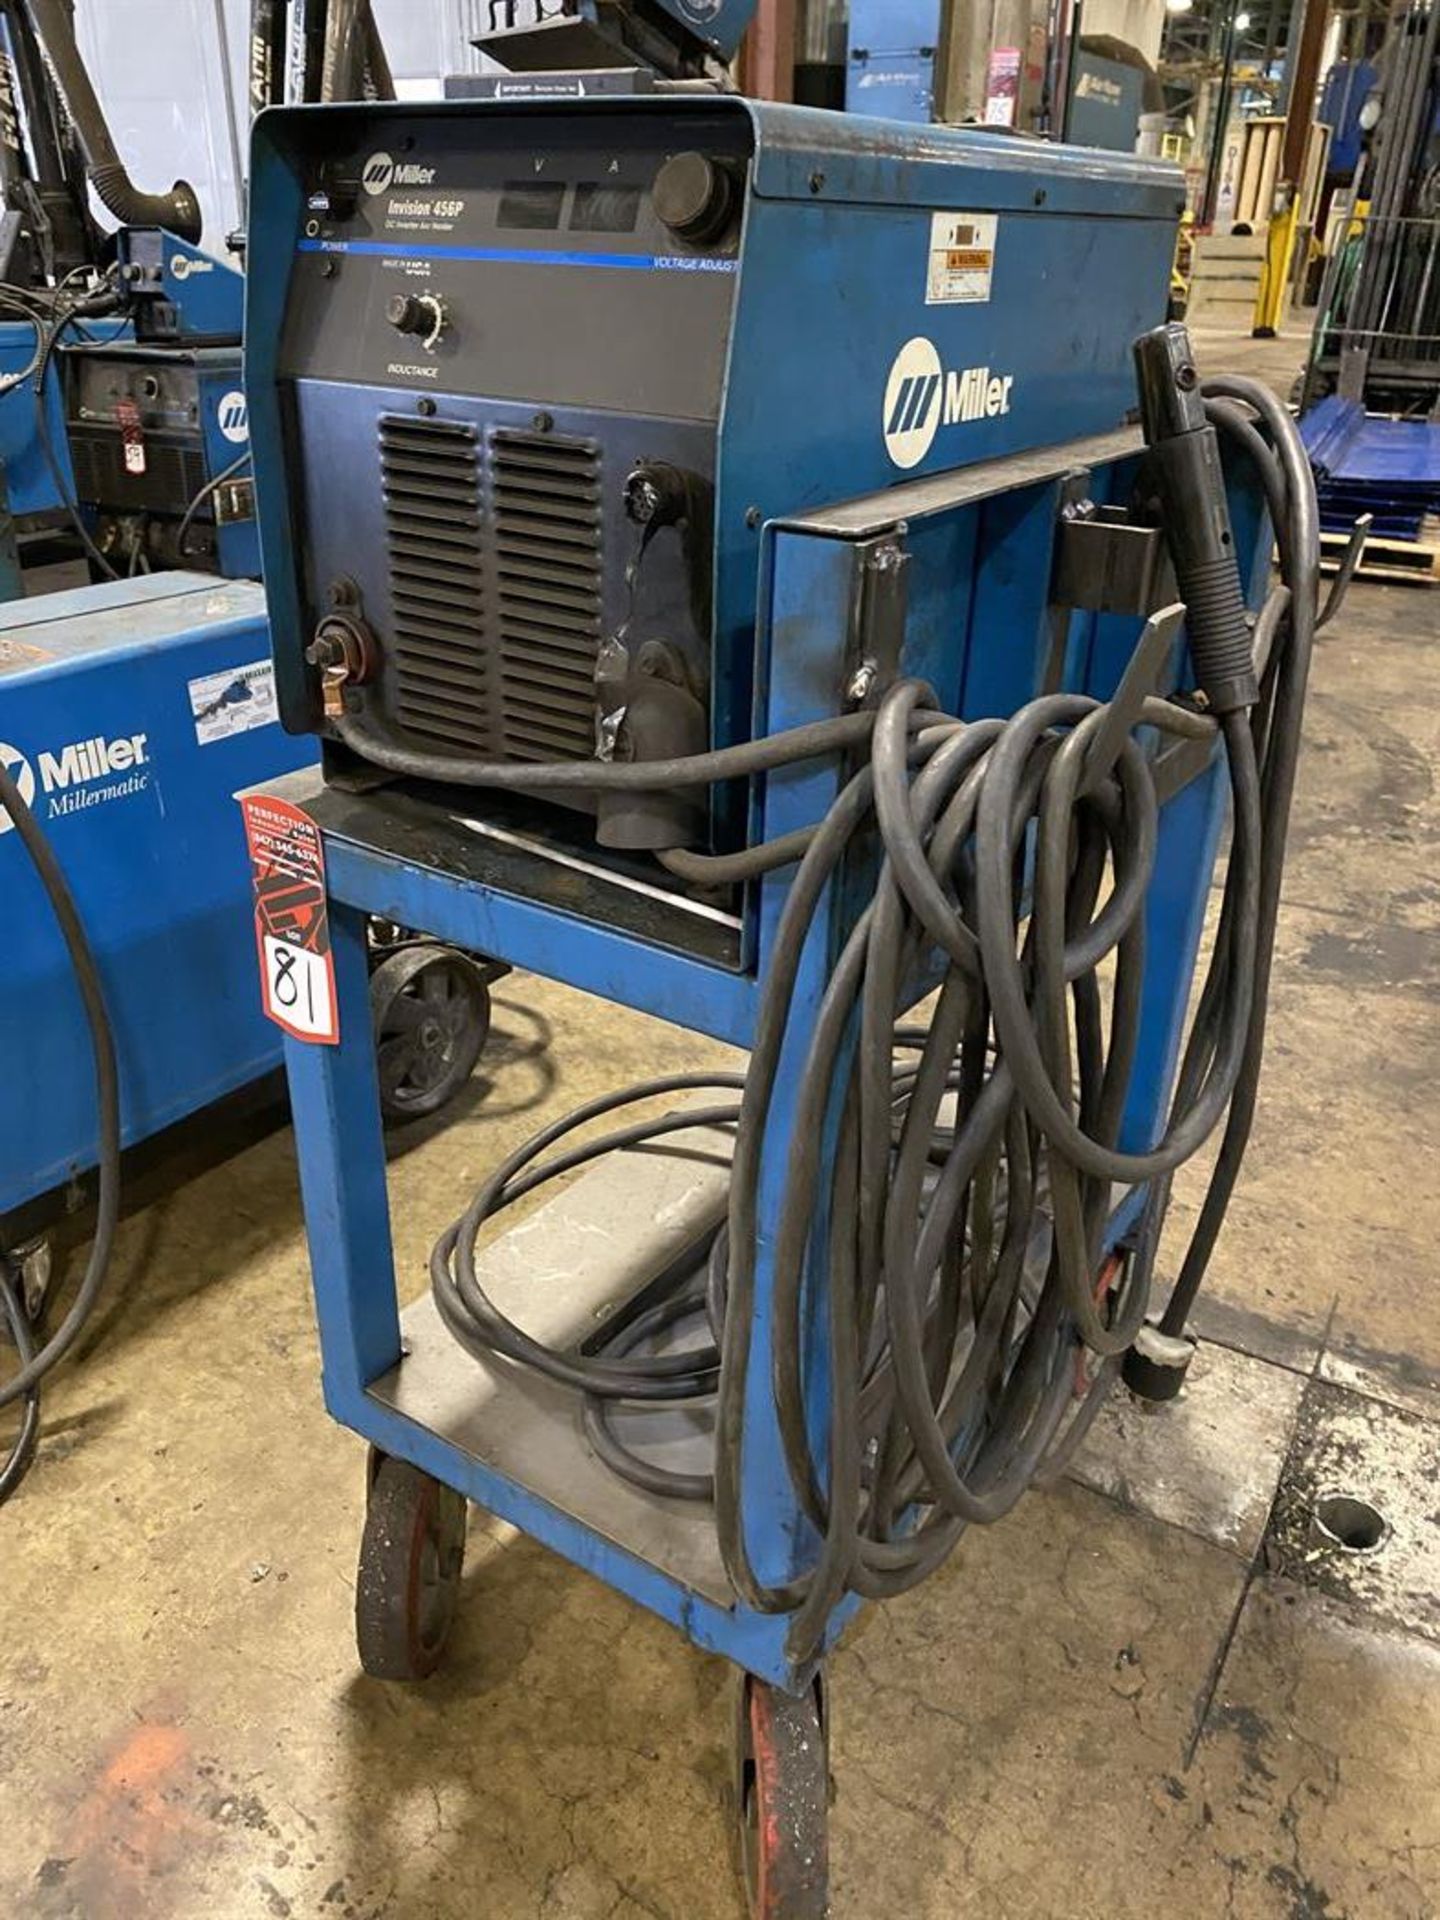 Miller Invision 456P Welding Power Source s/n KH479033